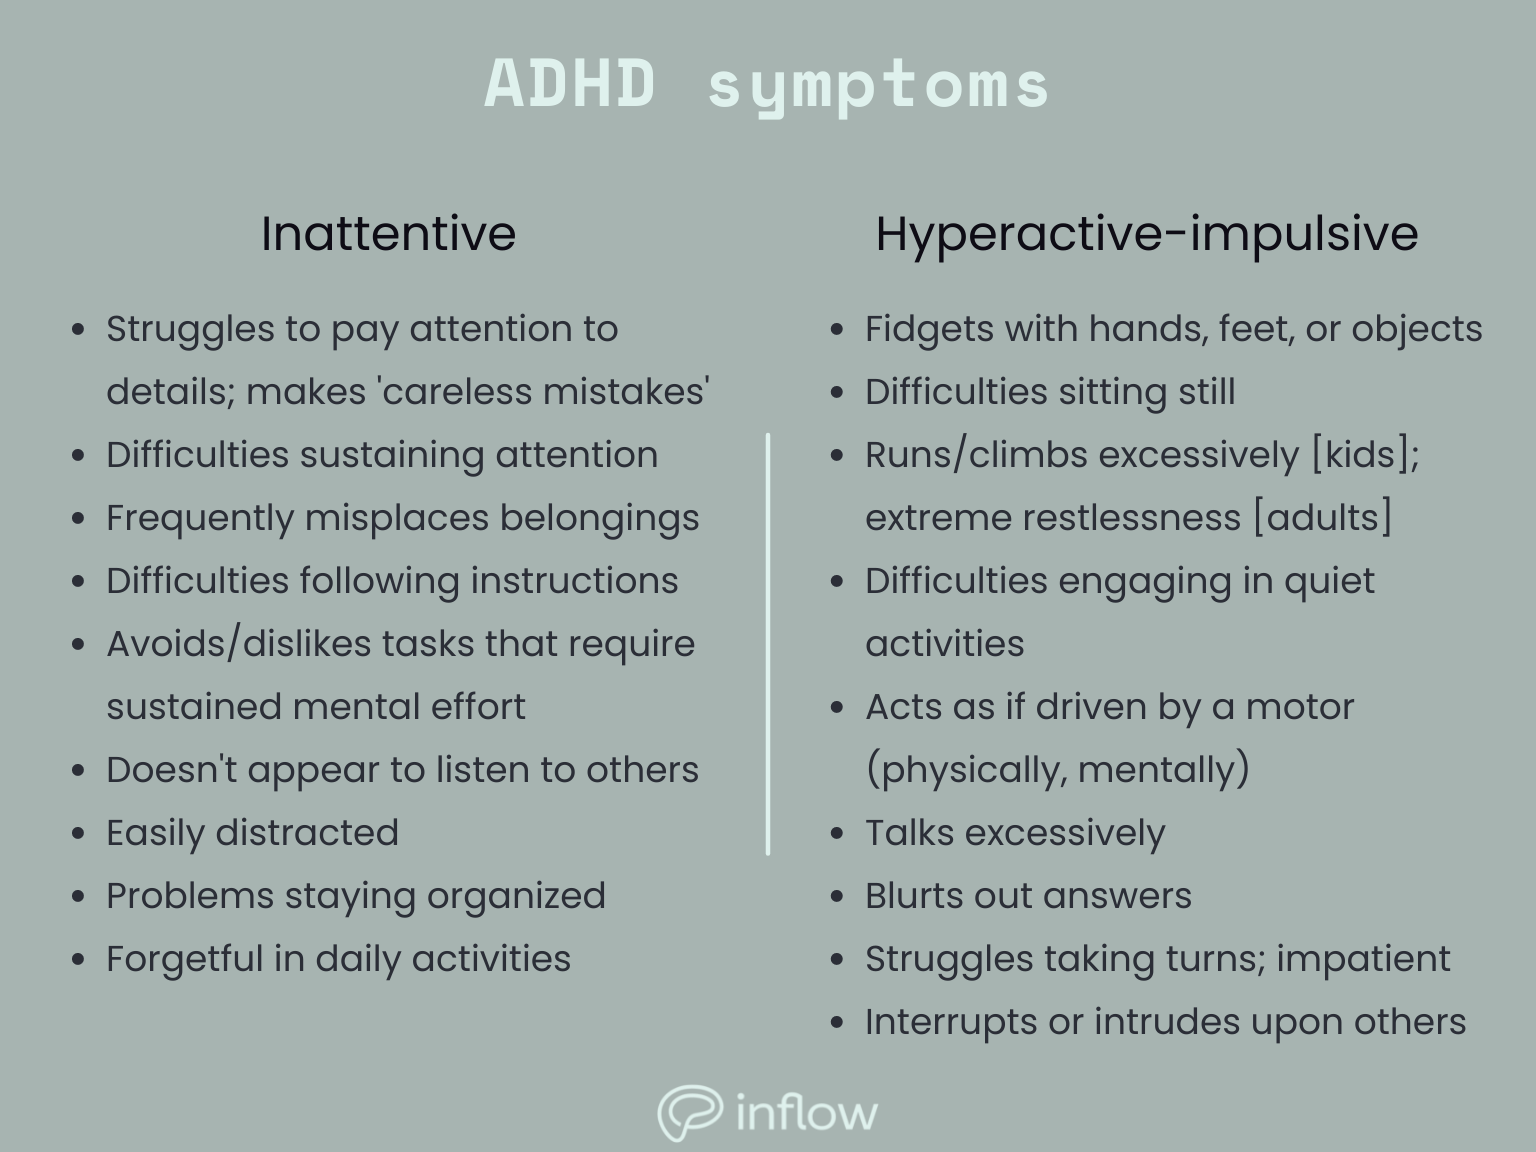 ADHD symptoms. Left column: inattentive. Symptoms: Struggles to give close attention to details or makes ‘careless’ mistakes, difficulty sustaining attention, does not appear to listen, struggles with following instructions, unorganized, avoids or dislikes tasks requiring sustained mental effort, frequently misplaces things, easily distracted, forgetful in daily activities. Right column: hyperactive-impulsive. Symptoms: fidgets with hands or feet or squirms in chair, difficulty remaining seated, runs or climbs excessively [kids]; extreme restlessness [adults], difficulty engaging in quiet activities, acts as if driven by a motor, physically and/or mentally, talks excessively, blurts out answers, difficulty waiting or taking turns (impatience), interrupts or intrudes upon others